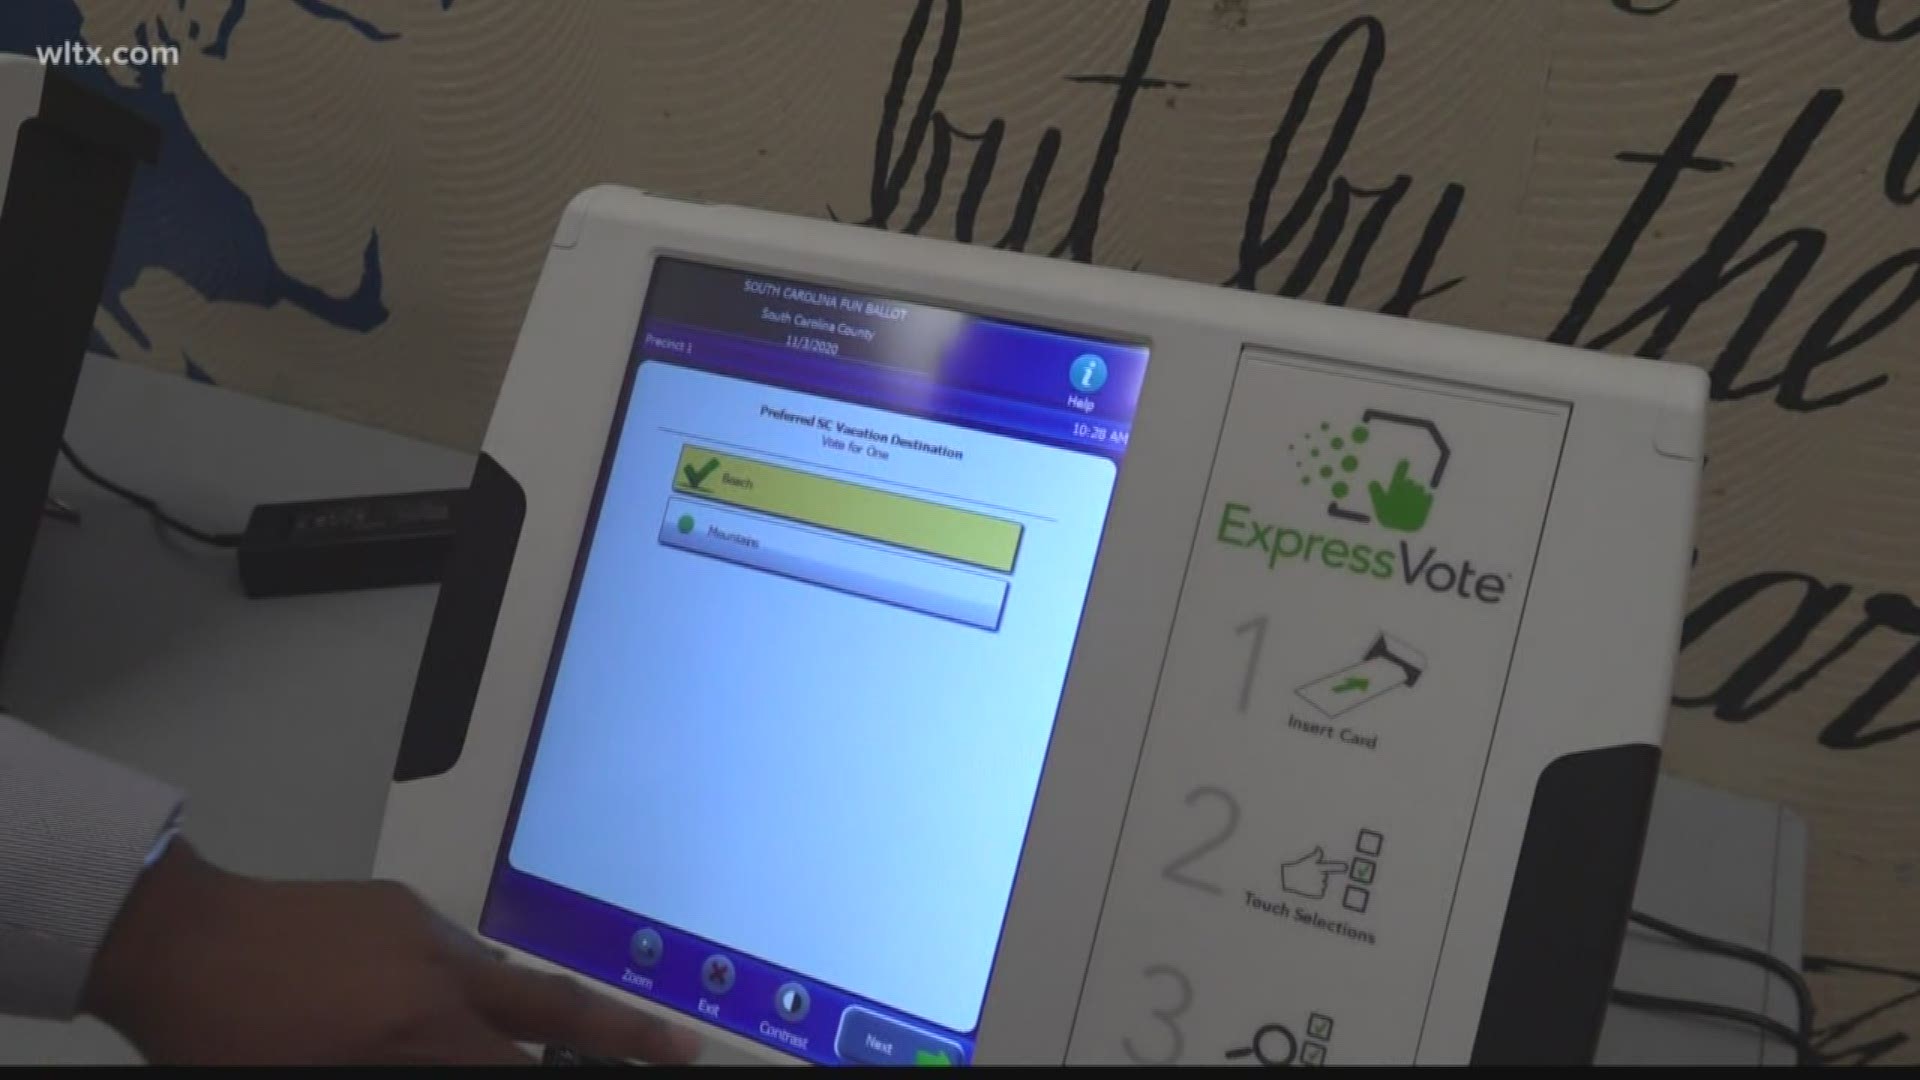 There are multiple demonstrations being held this week in Columbia that give voters a chance to test the new voting machines prior to the November elections.